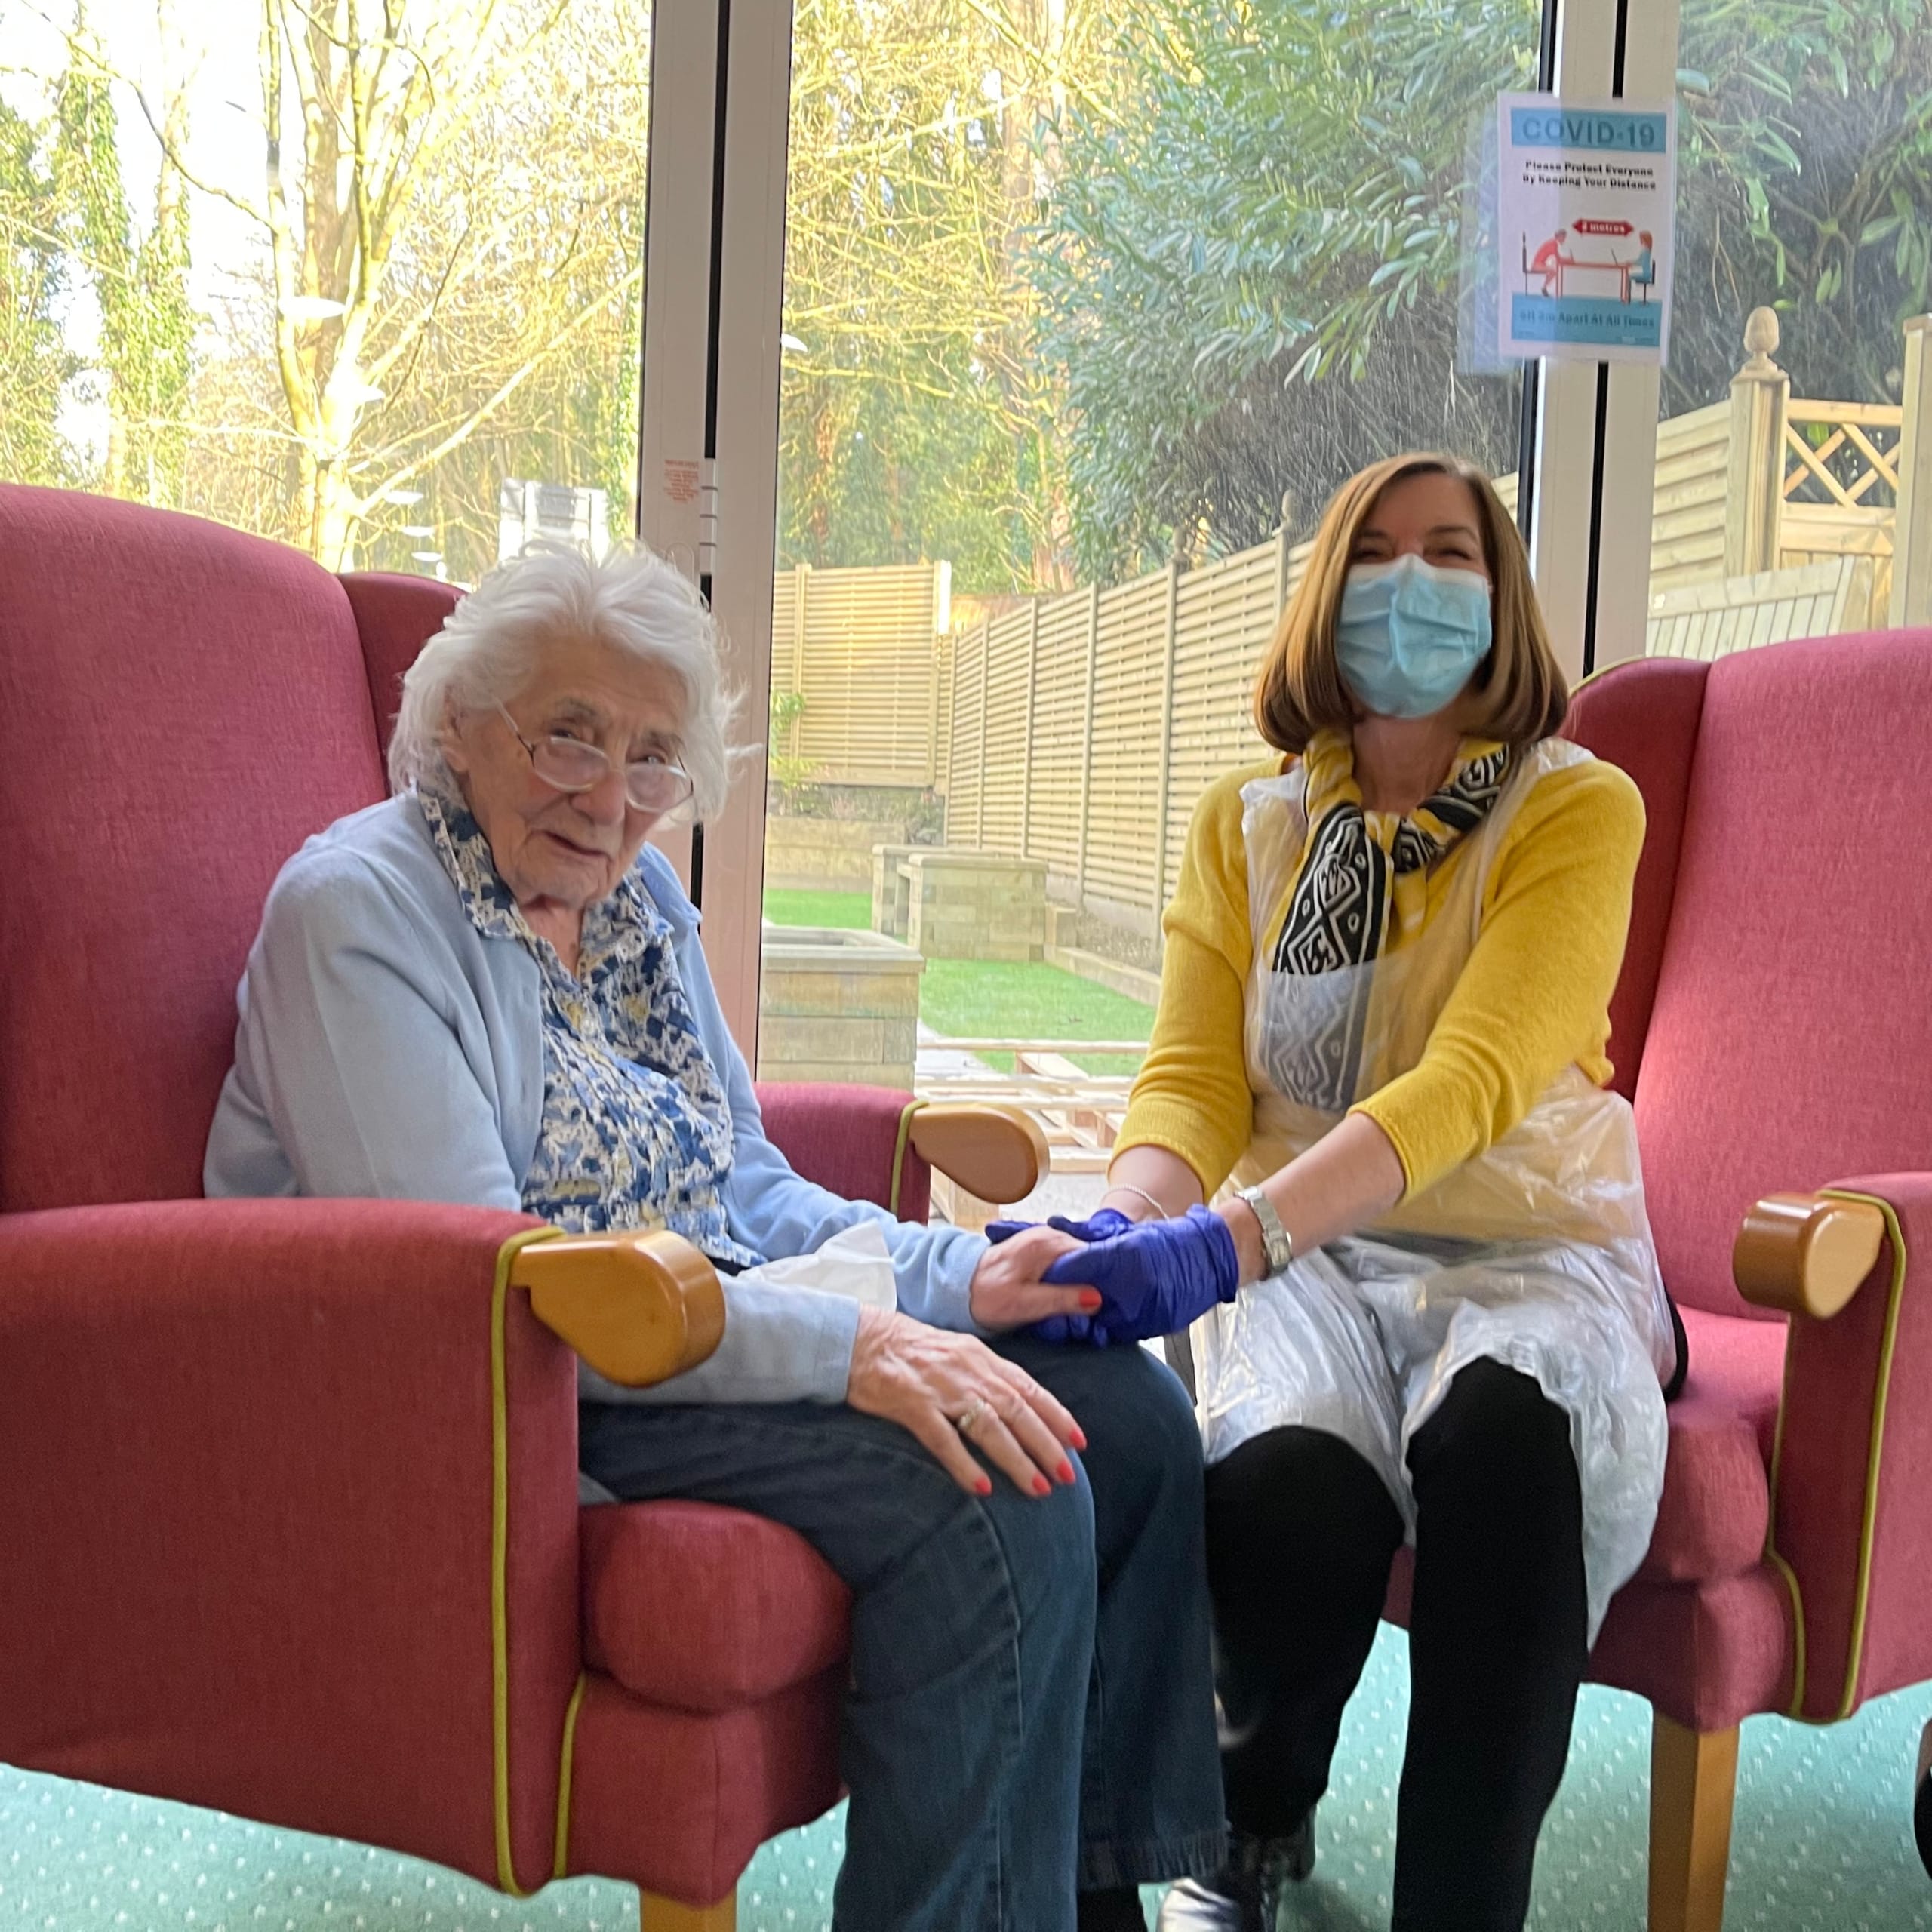 Westerham Place Care Home resident Joan welcomes her daughter in the designated visiting room for the first time.